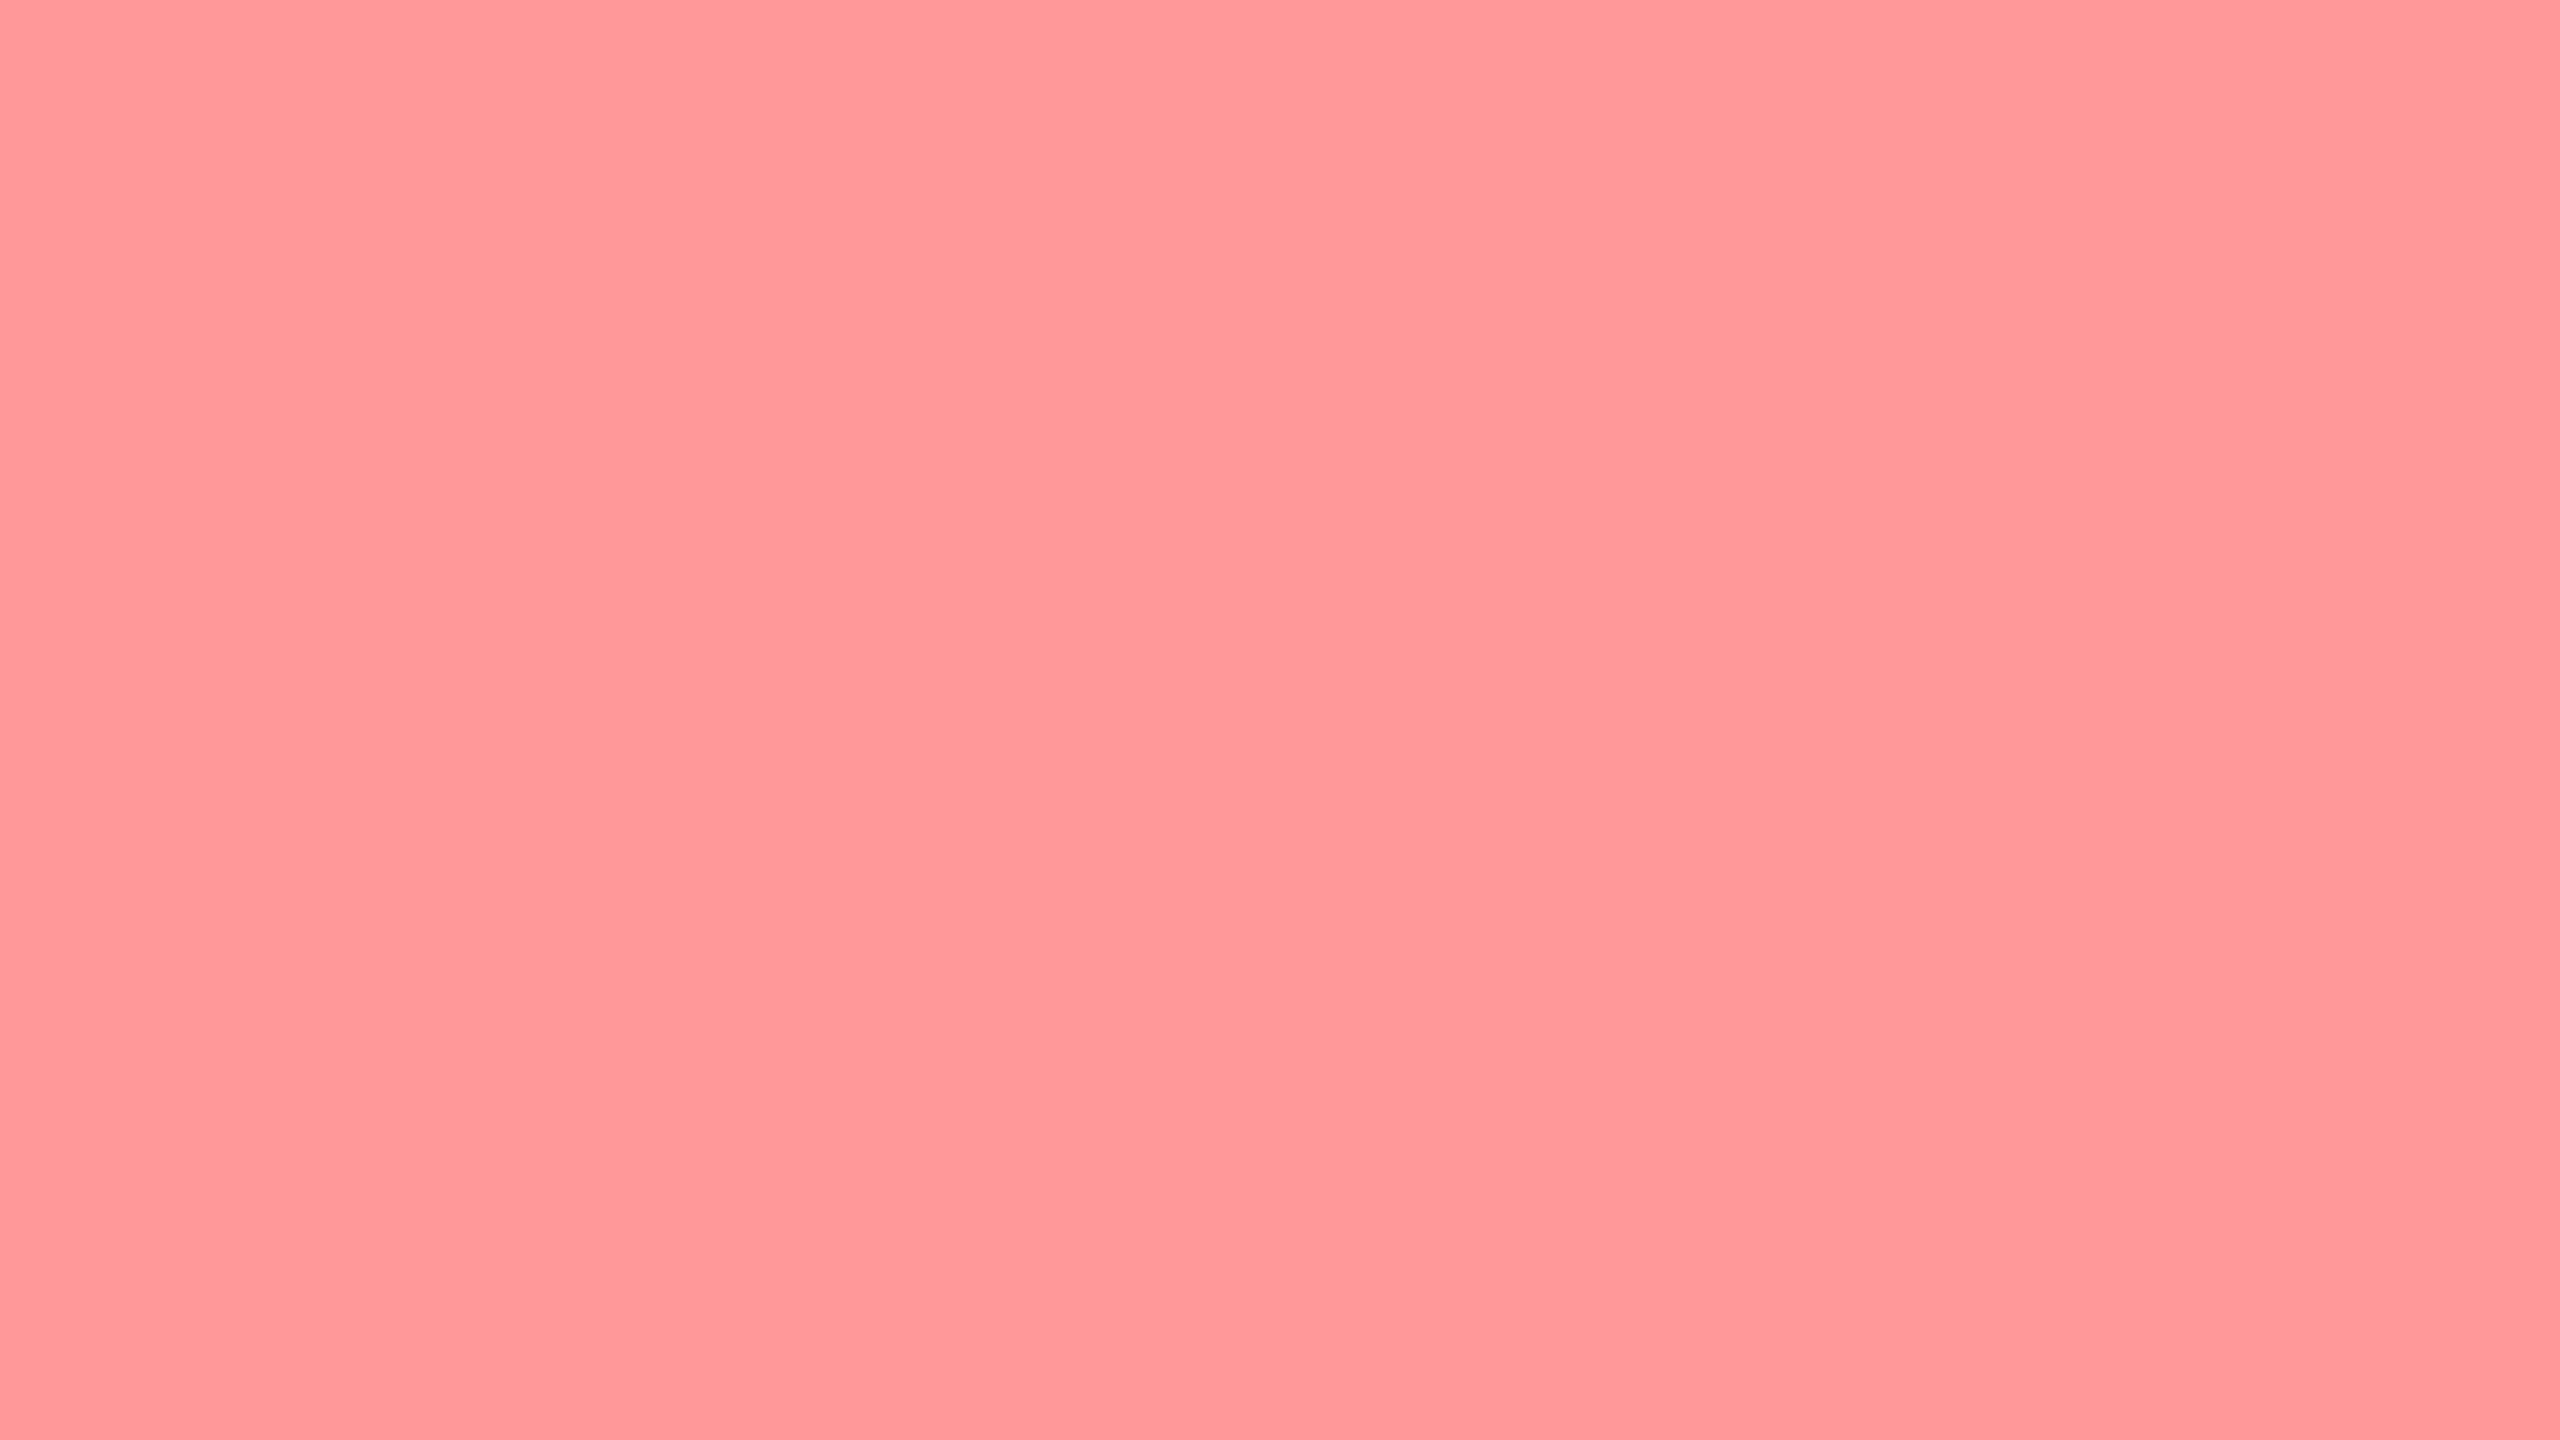 2560x1440 Light Salmon Pink Solid Color Background